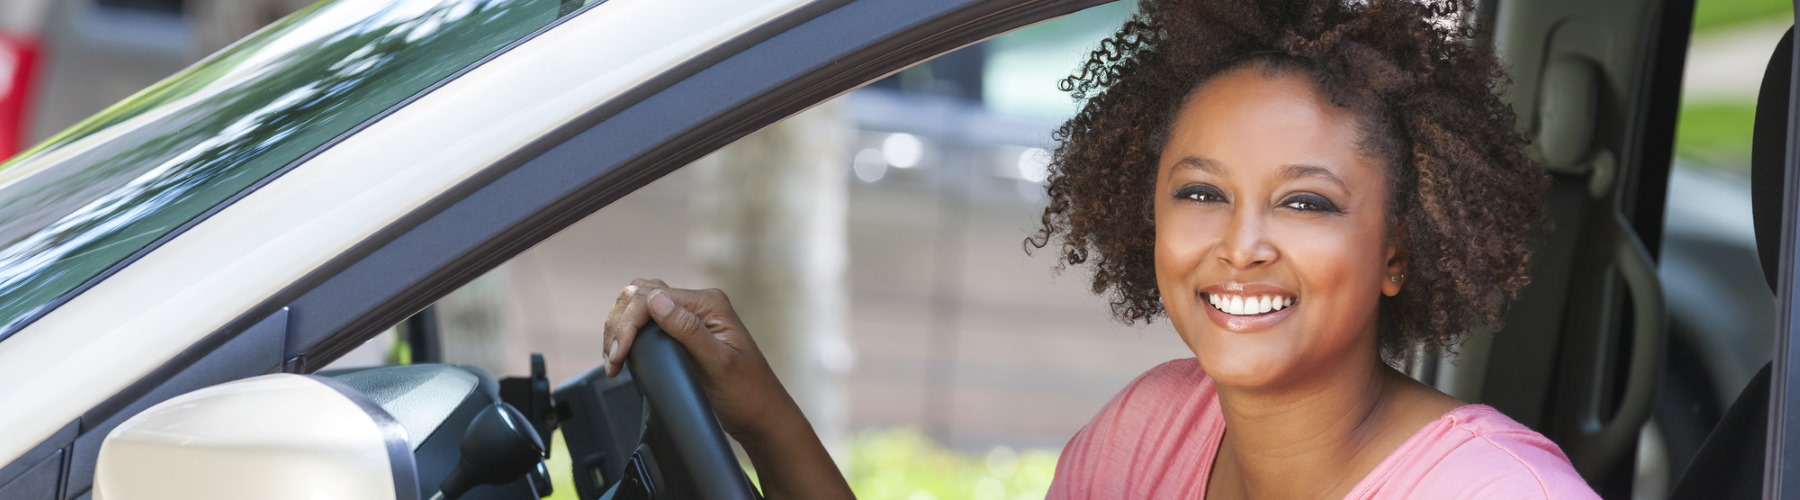 Auto insurance represented by a woman sitting in a car